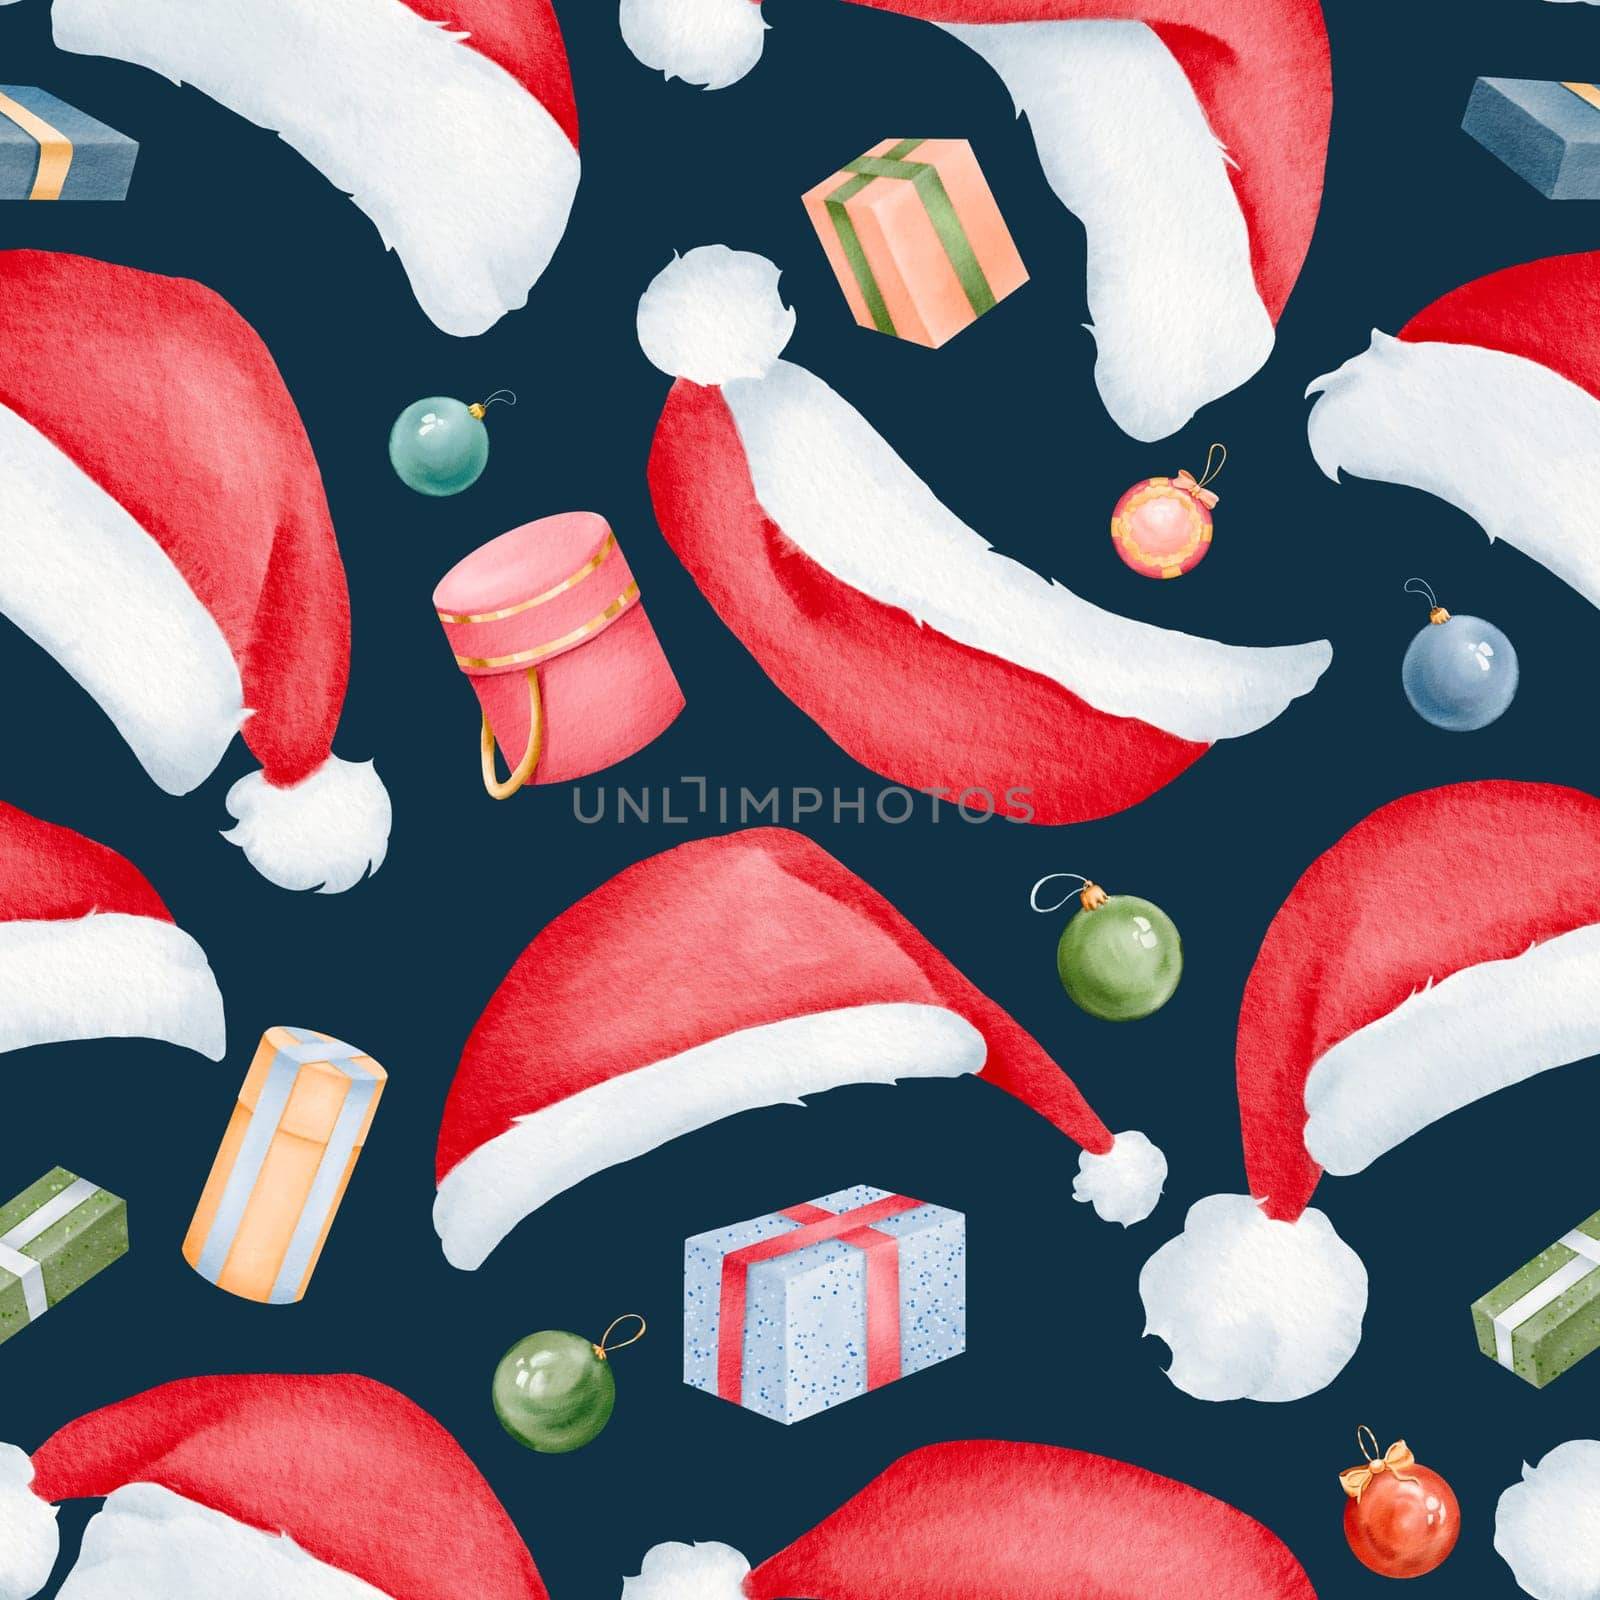 Seamless pattern. Presents. Santa Claus hat. Dark background. Christmas red hat in new year holiday cartoon design. for greeting card, postcards party invitations, posters, greetings, websites by Art_Mari_Ka